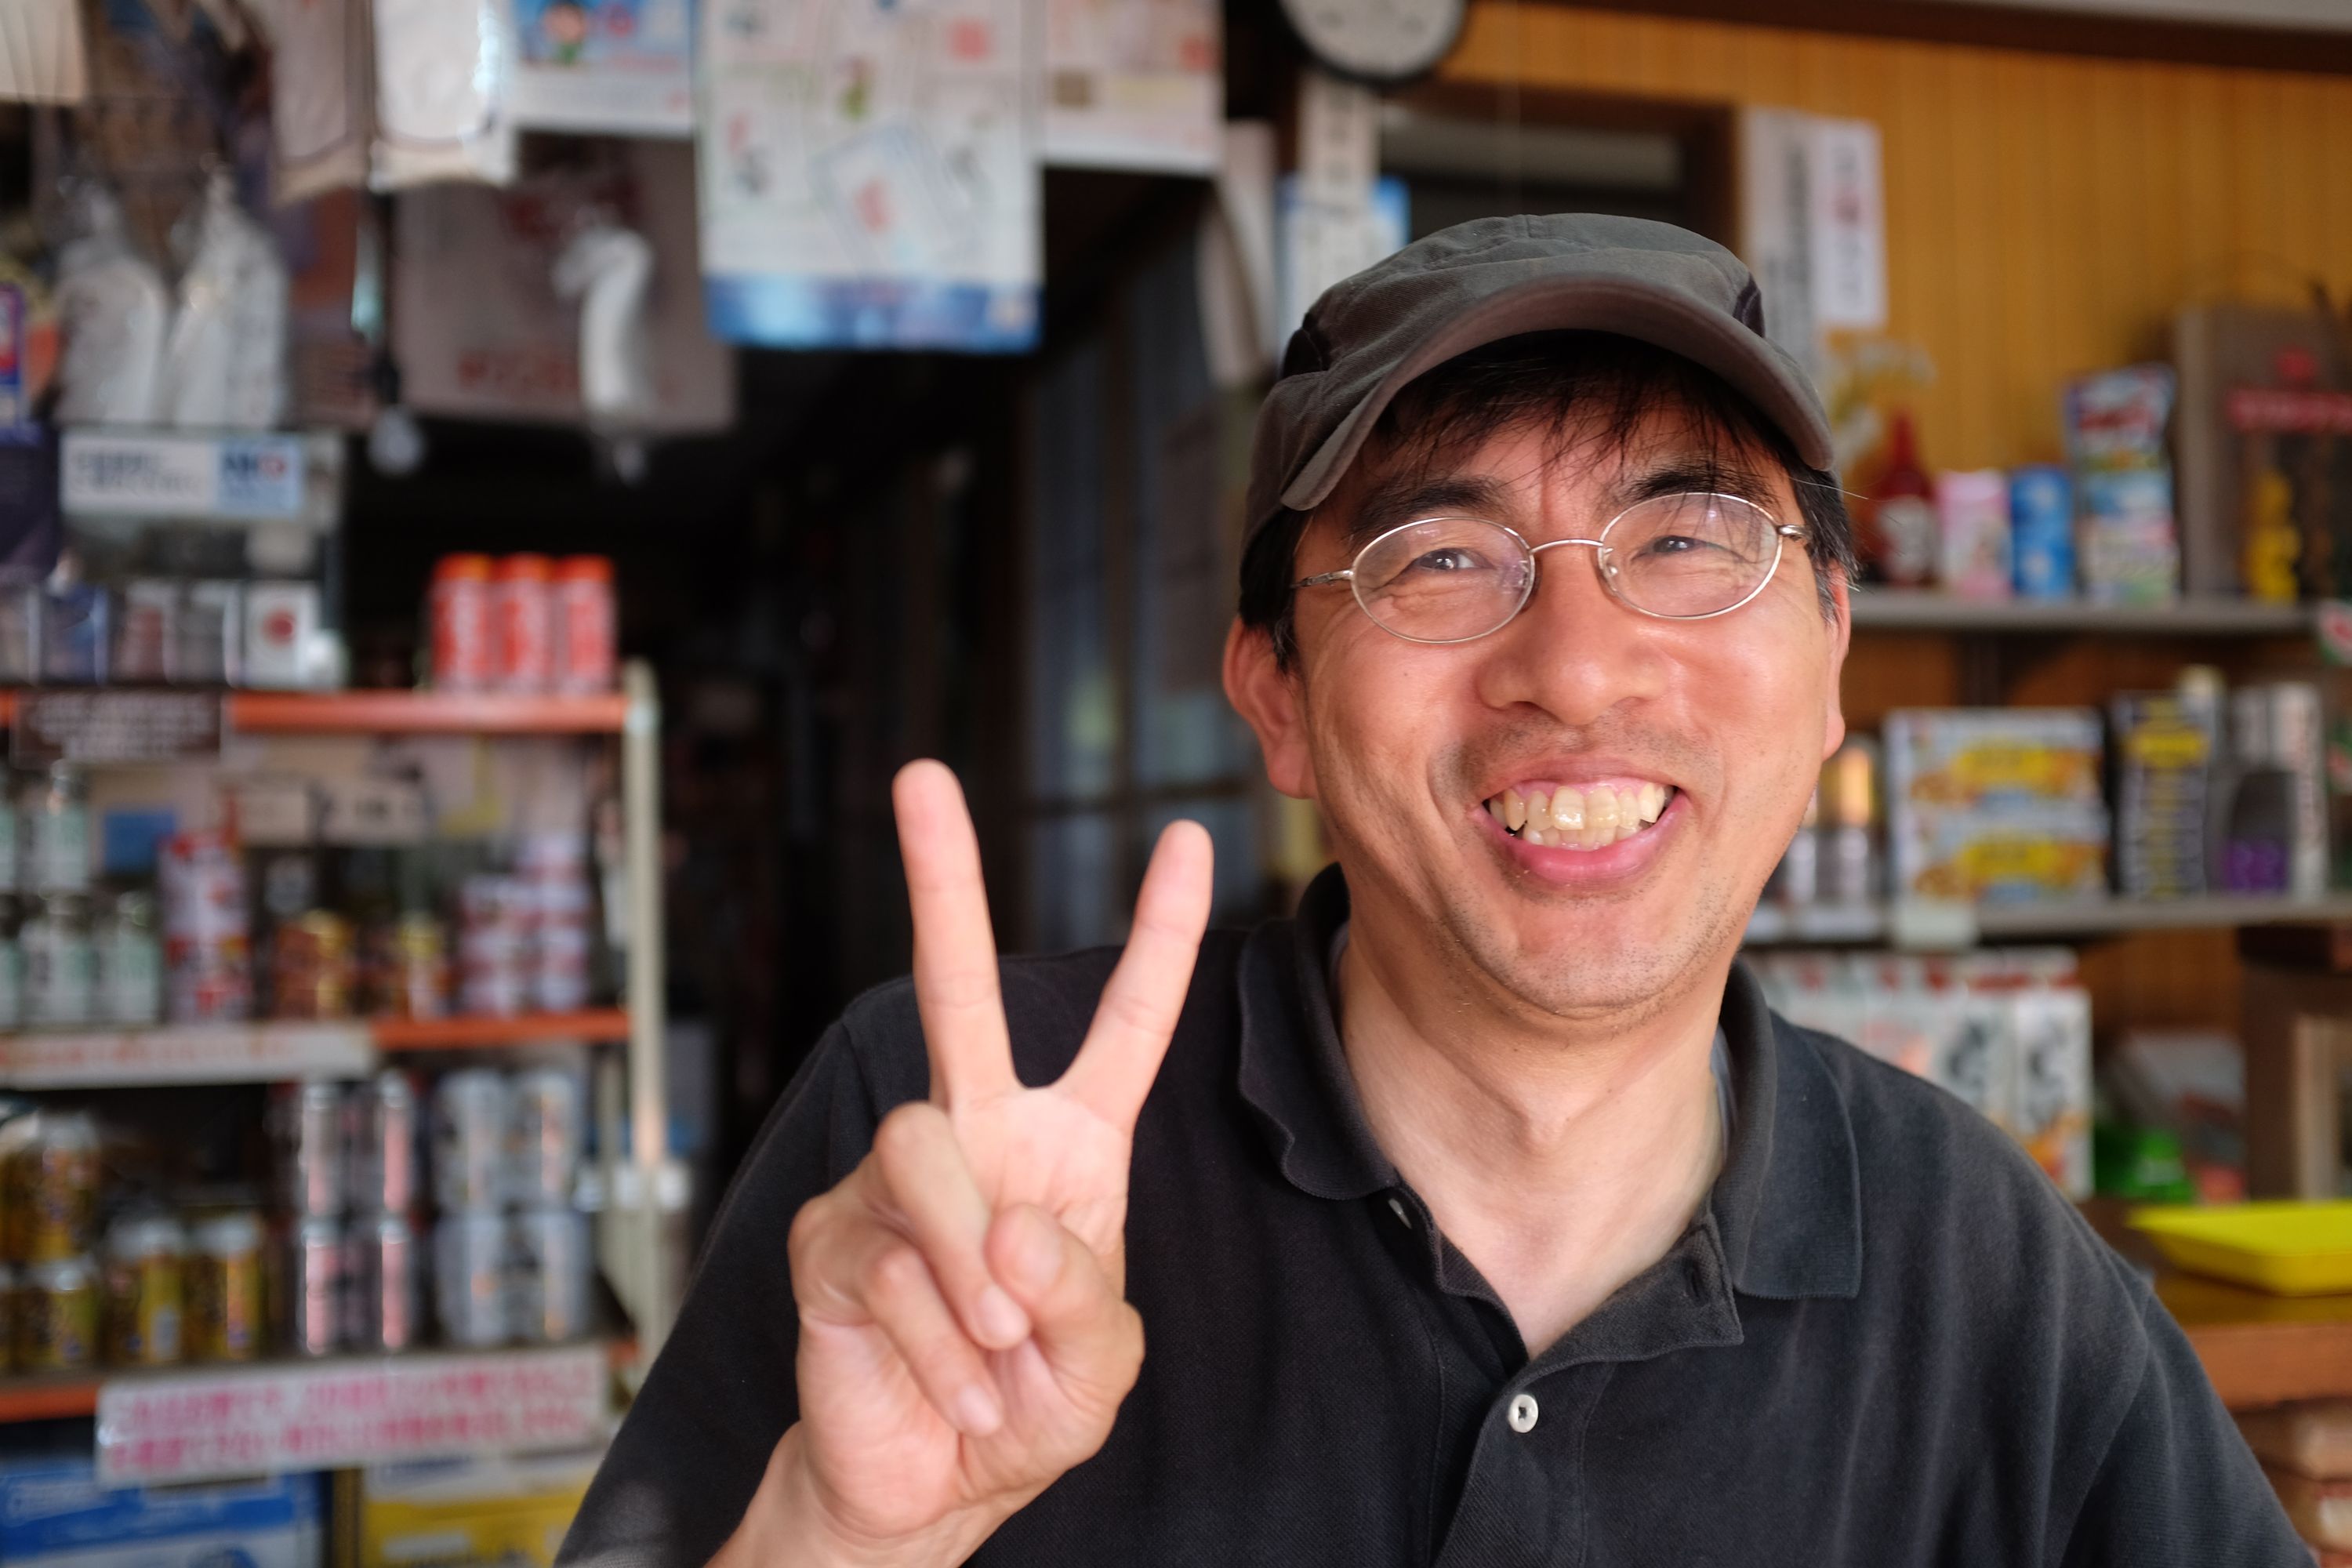 A Japanese man in glasses and a black polo shirt, Mr. Tadashi, smiles into the camera and shows the V sign.